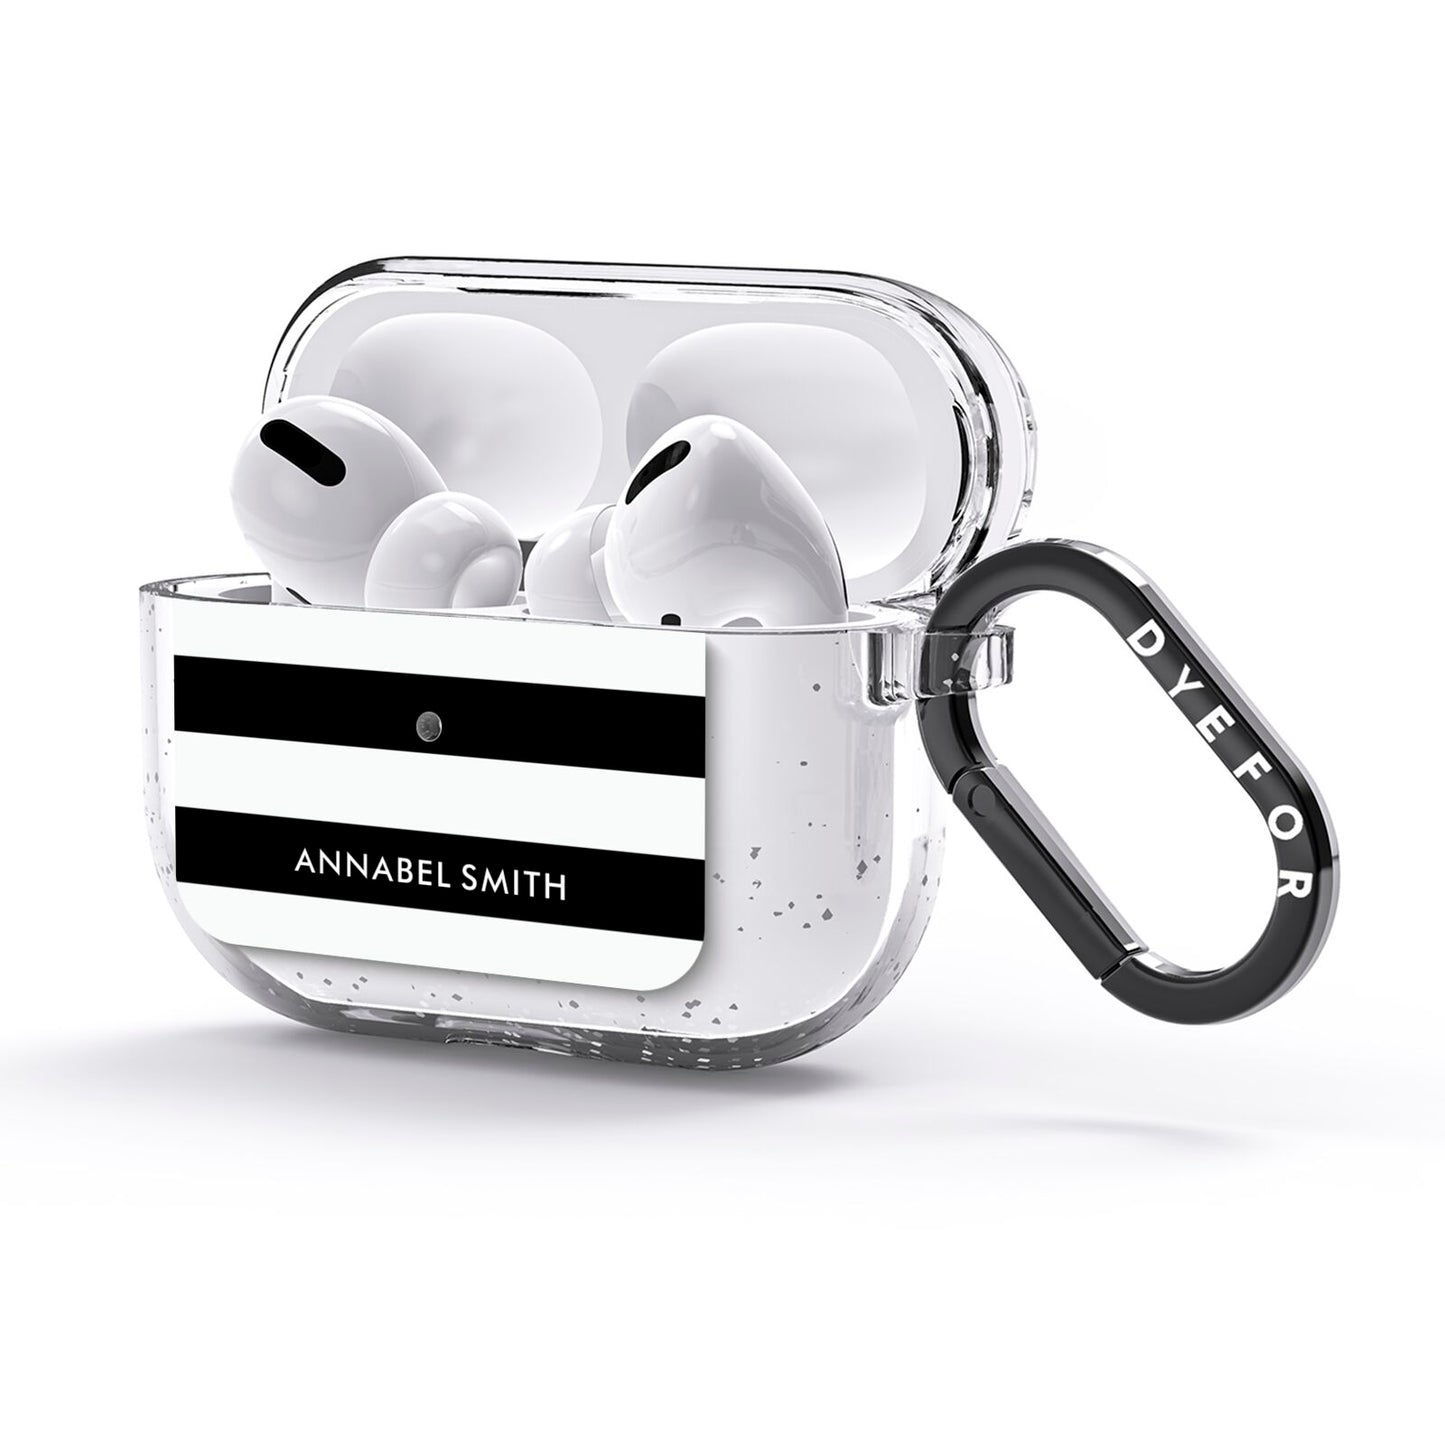 Personalised Black Striped Name or Initials AirPods Glitter Case 3rd Gen Side Image